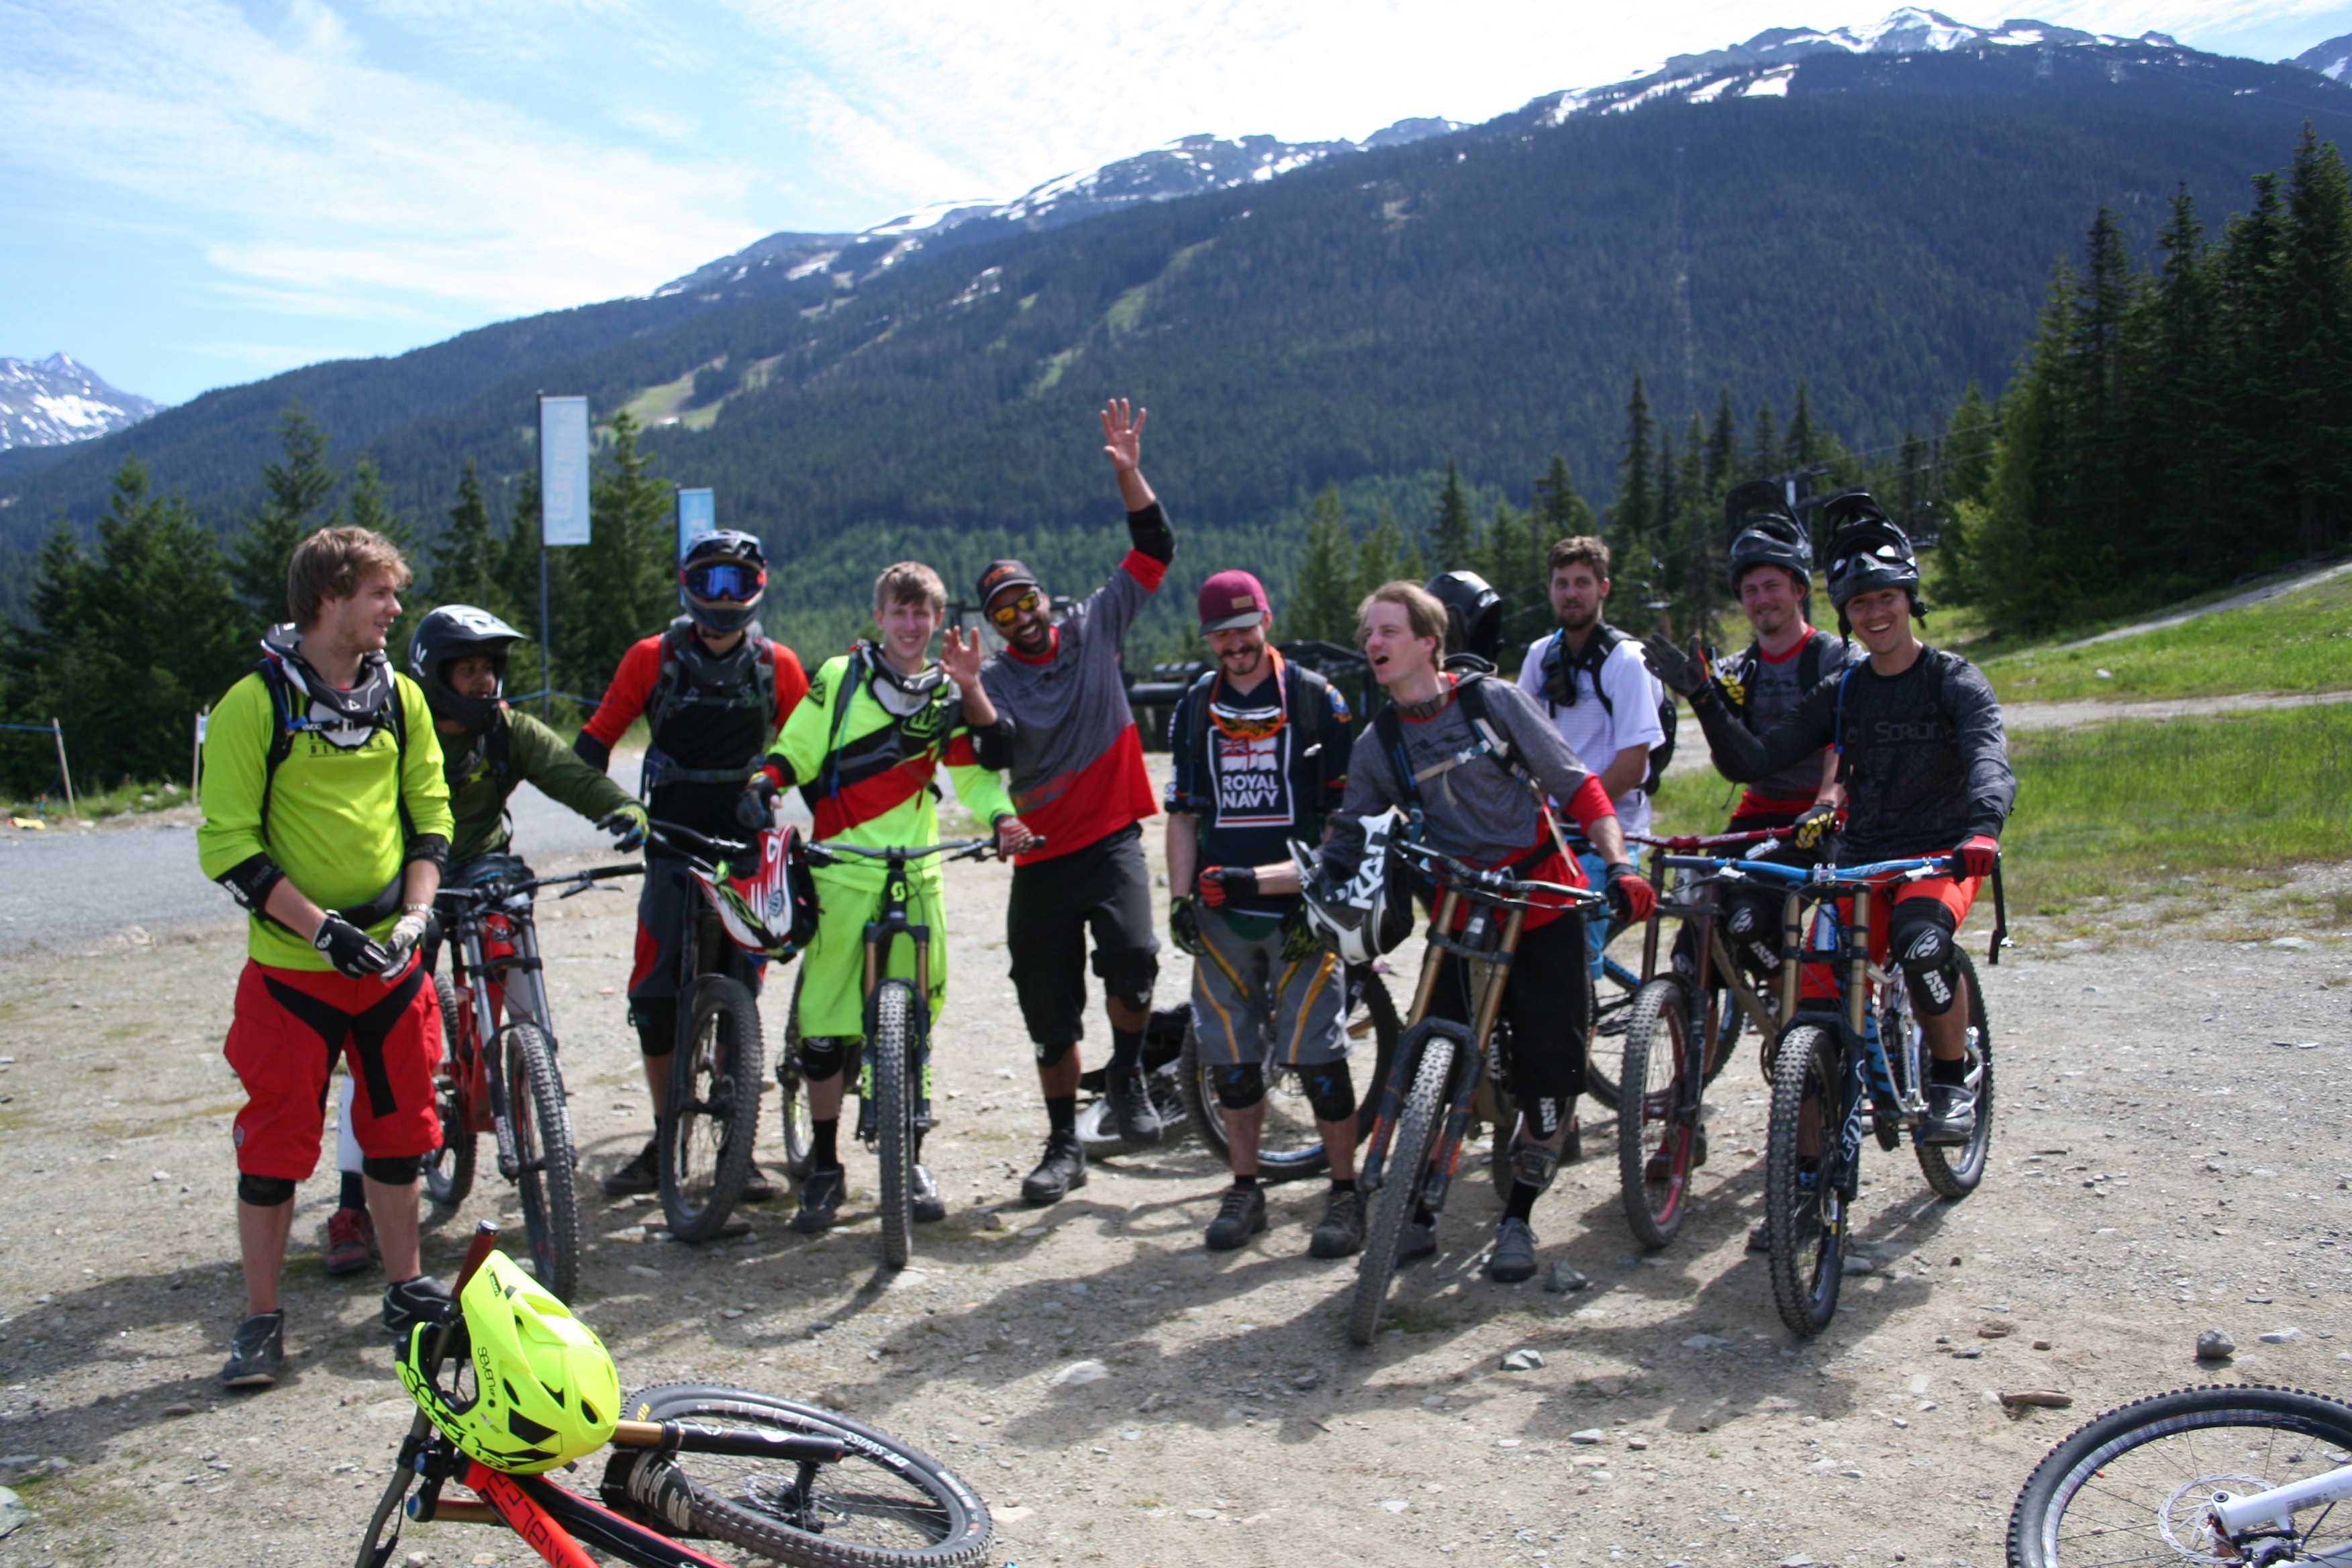 The MTB Instructor Camp trainees pose for a photo on Whistler Mountain before some fun laps